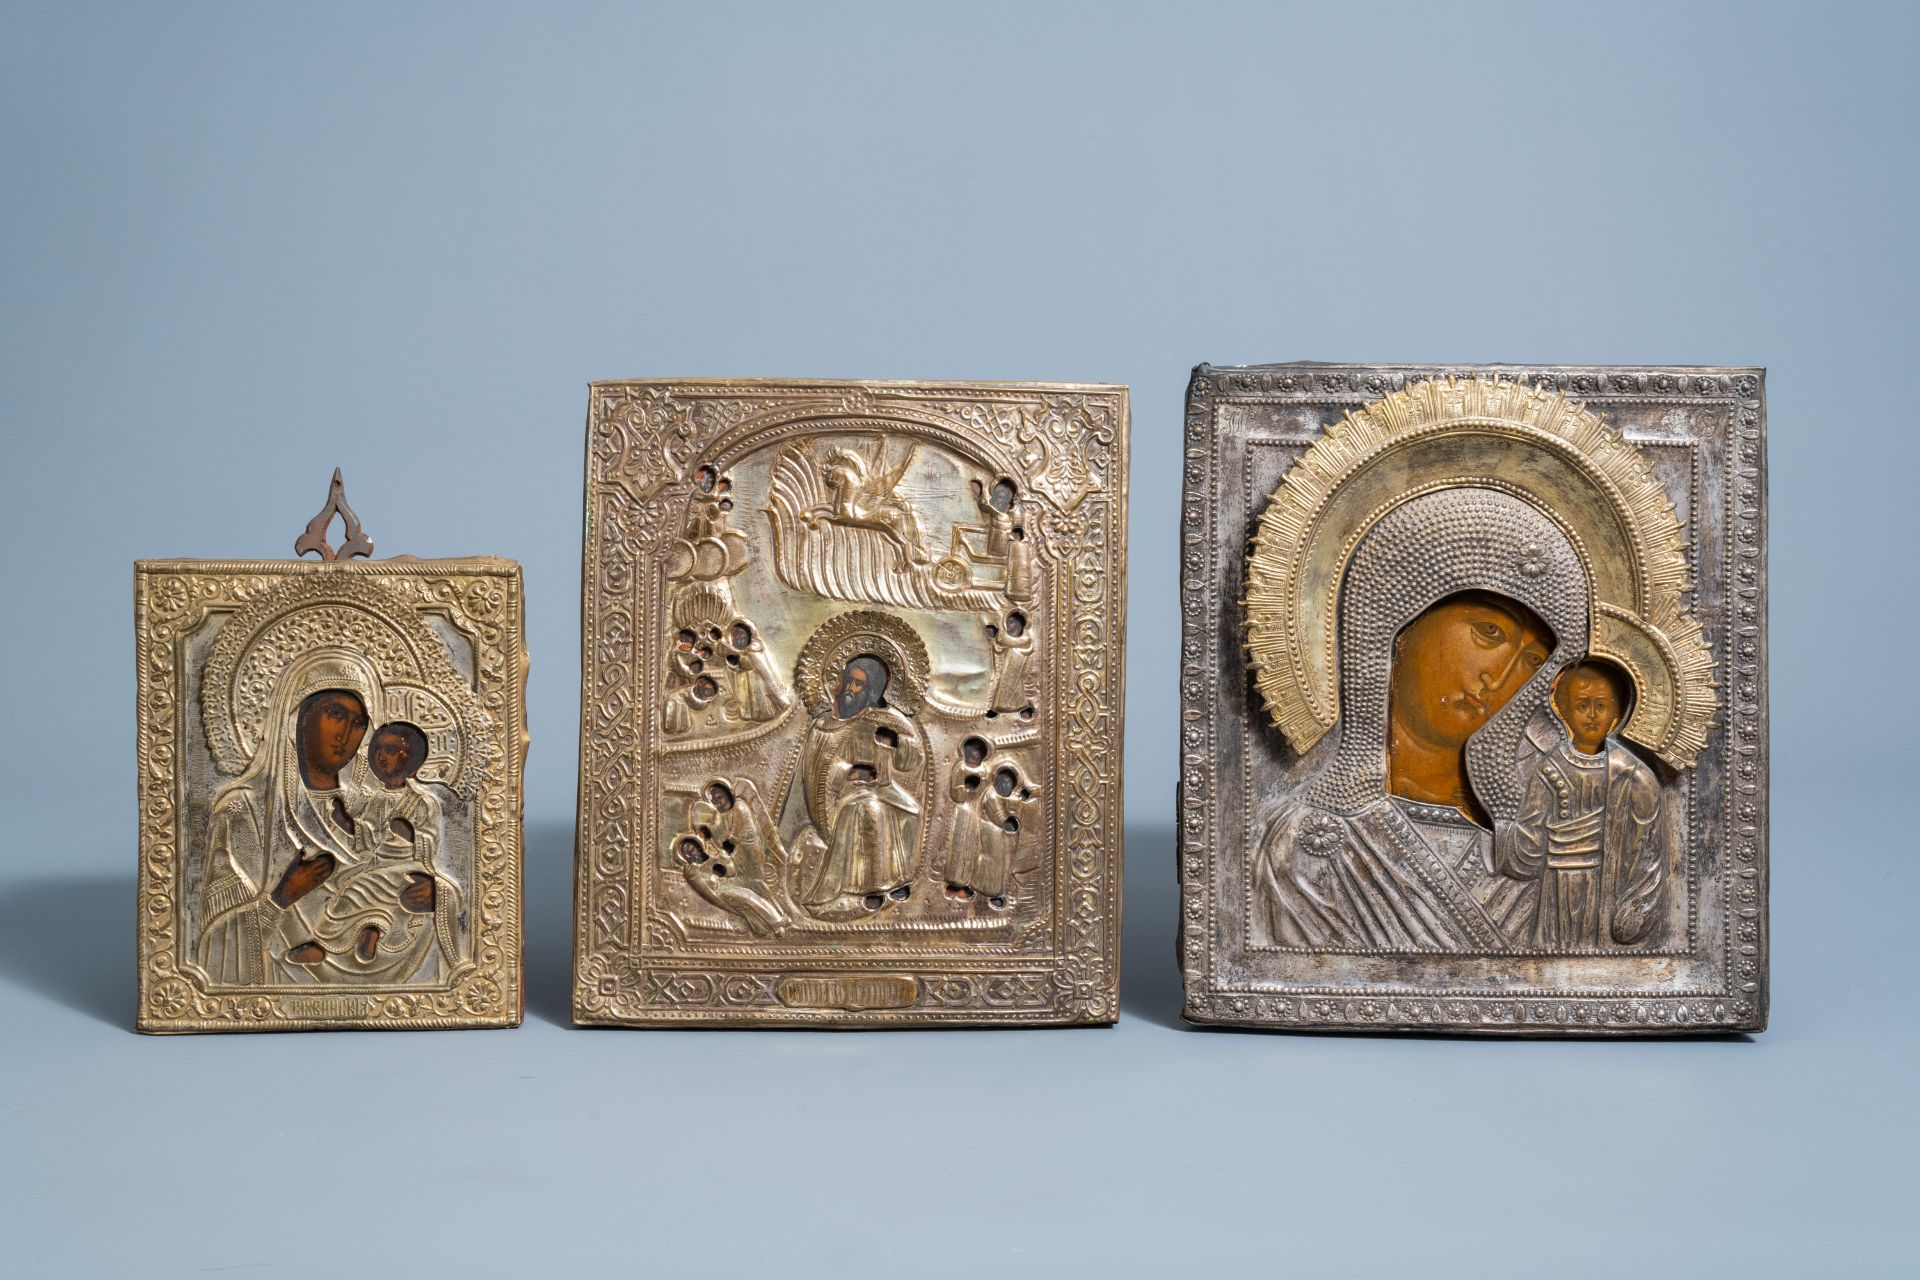 Two Russian 'Mother of God' icons and an 'Ascension of Elijah into the heavens' icon with copper okl